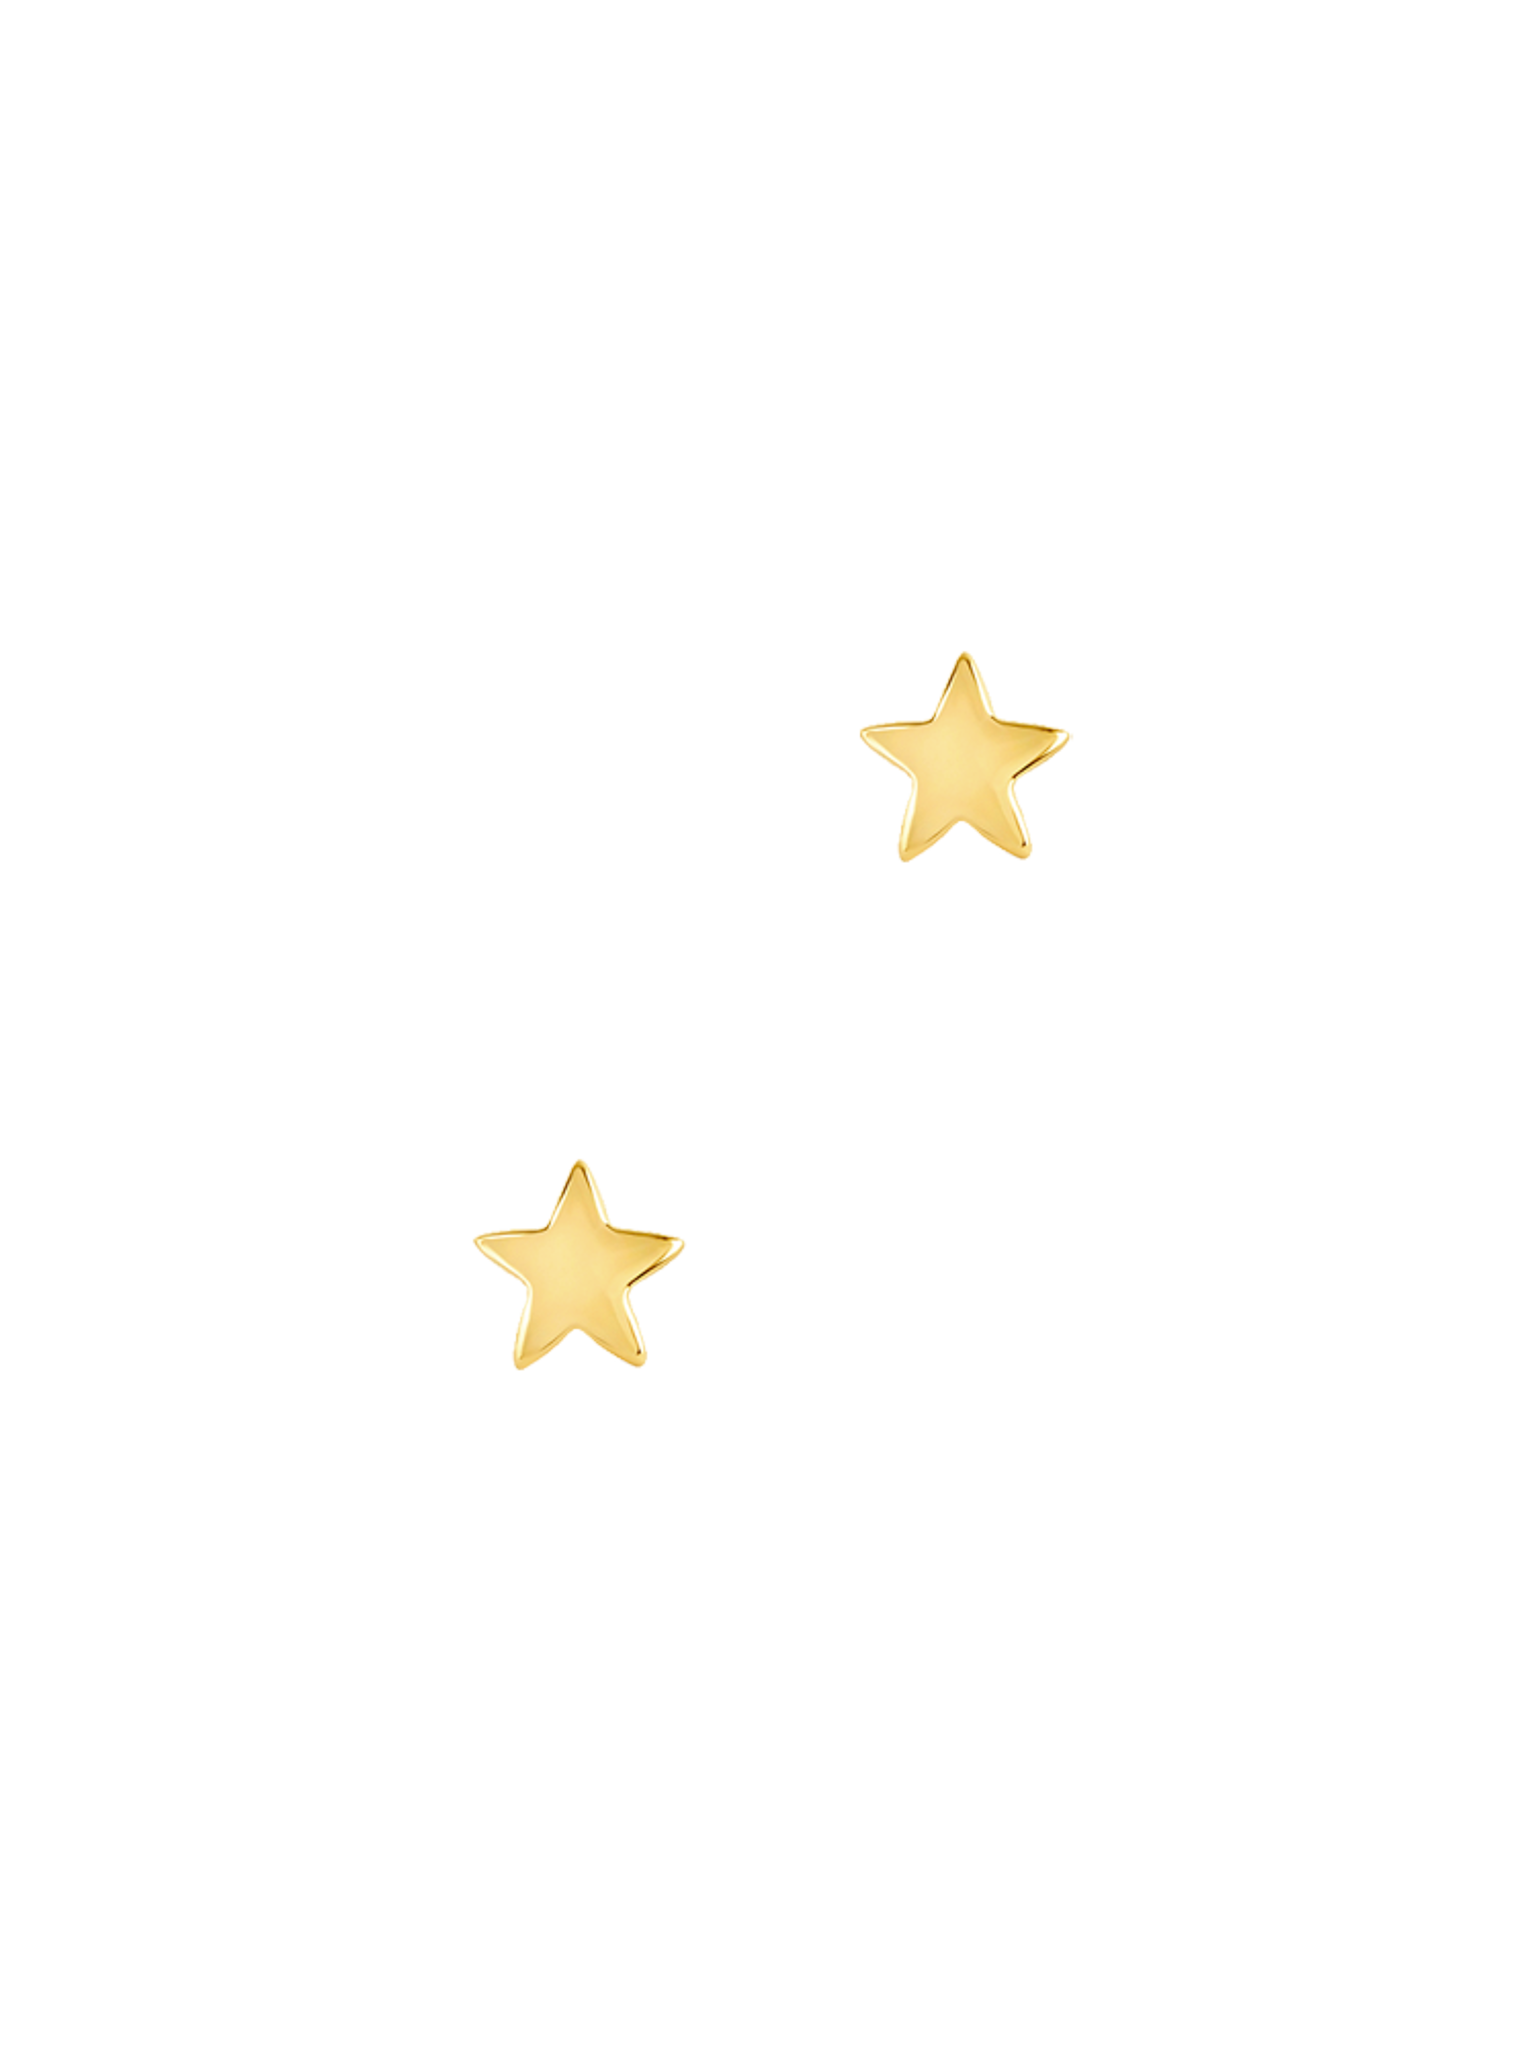 Recycled gold tiny star studs